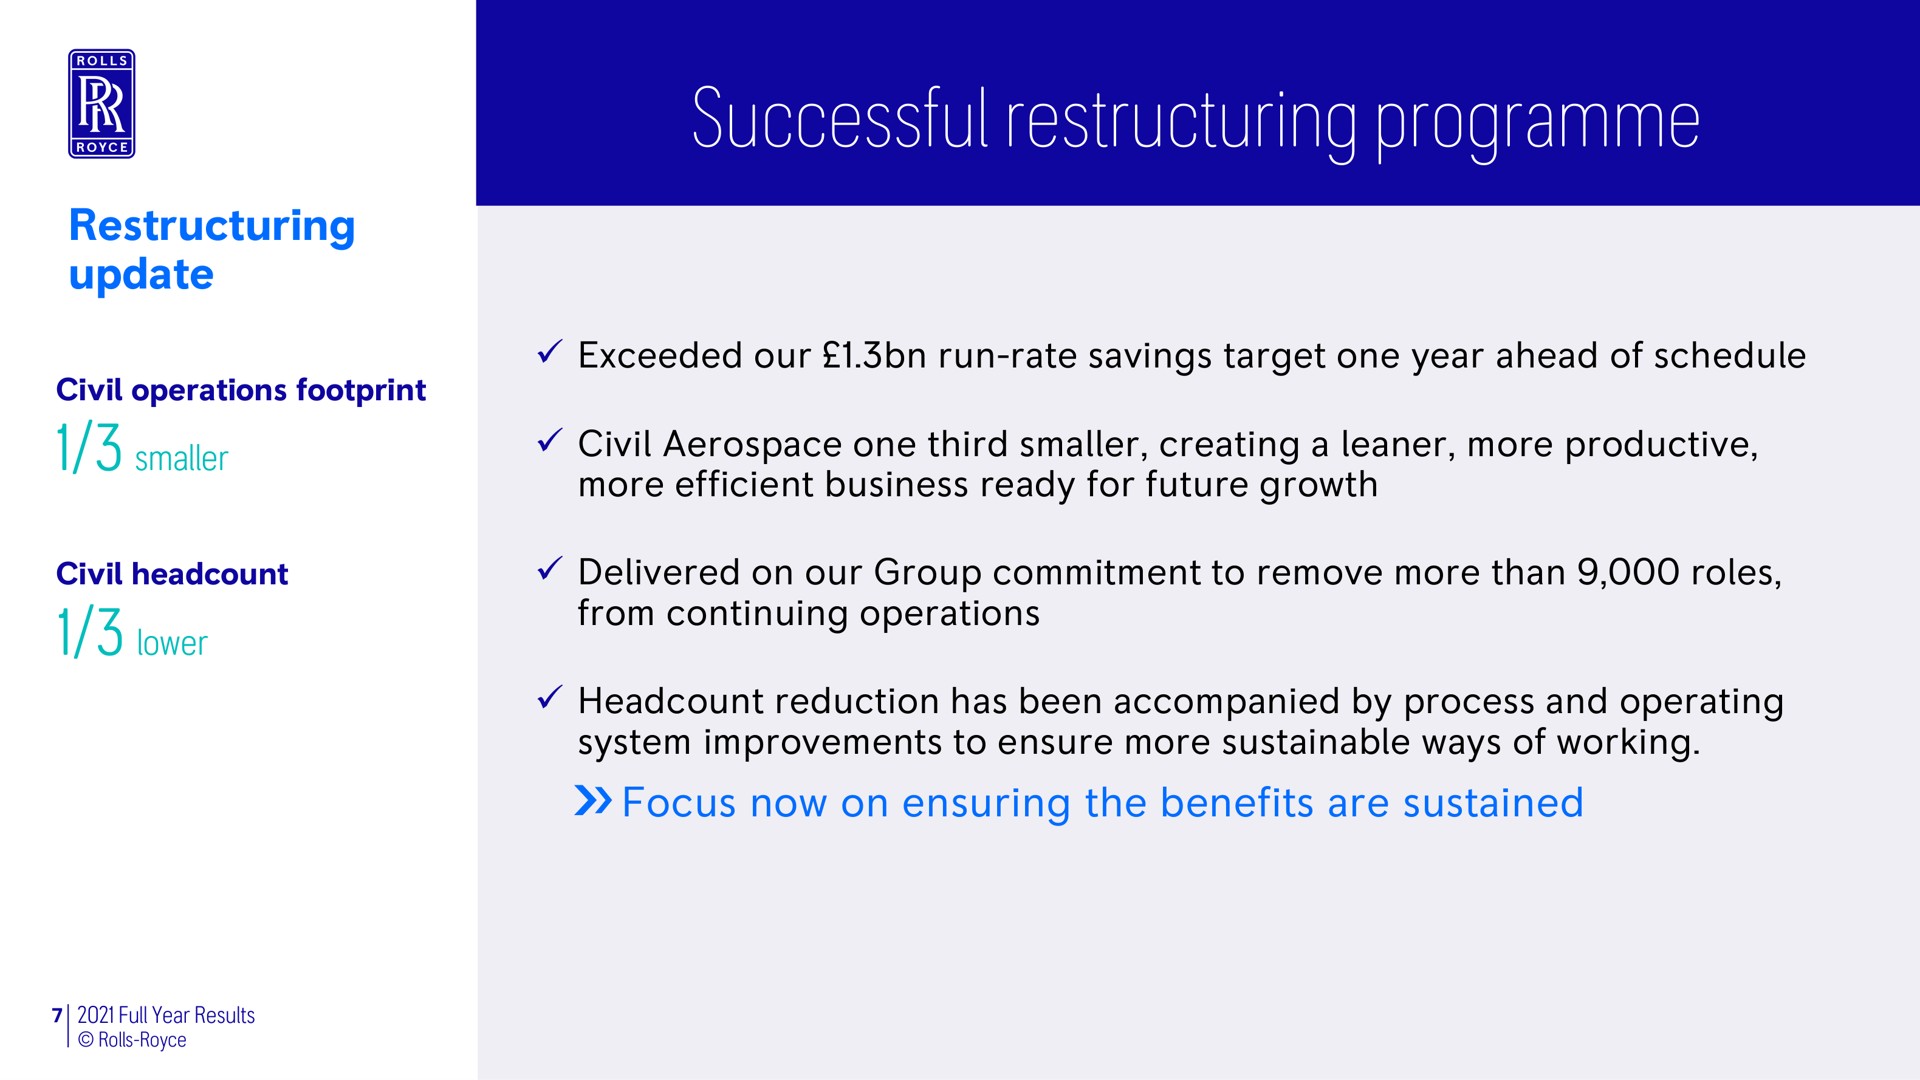 successful focus now on ensuring the benefits are sustained update | Rolls-Royce Holdings